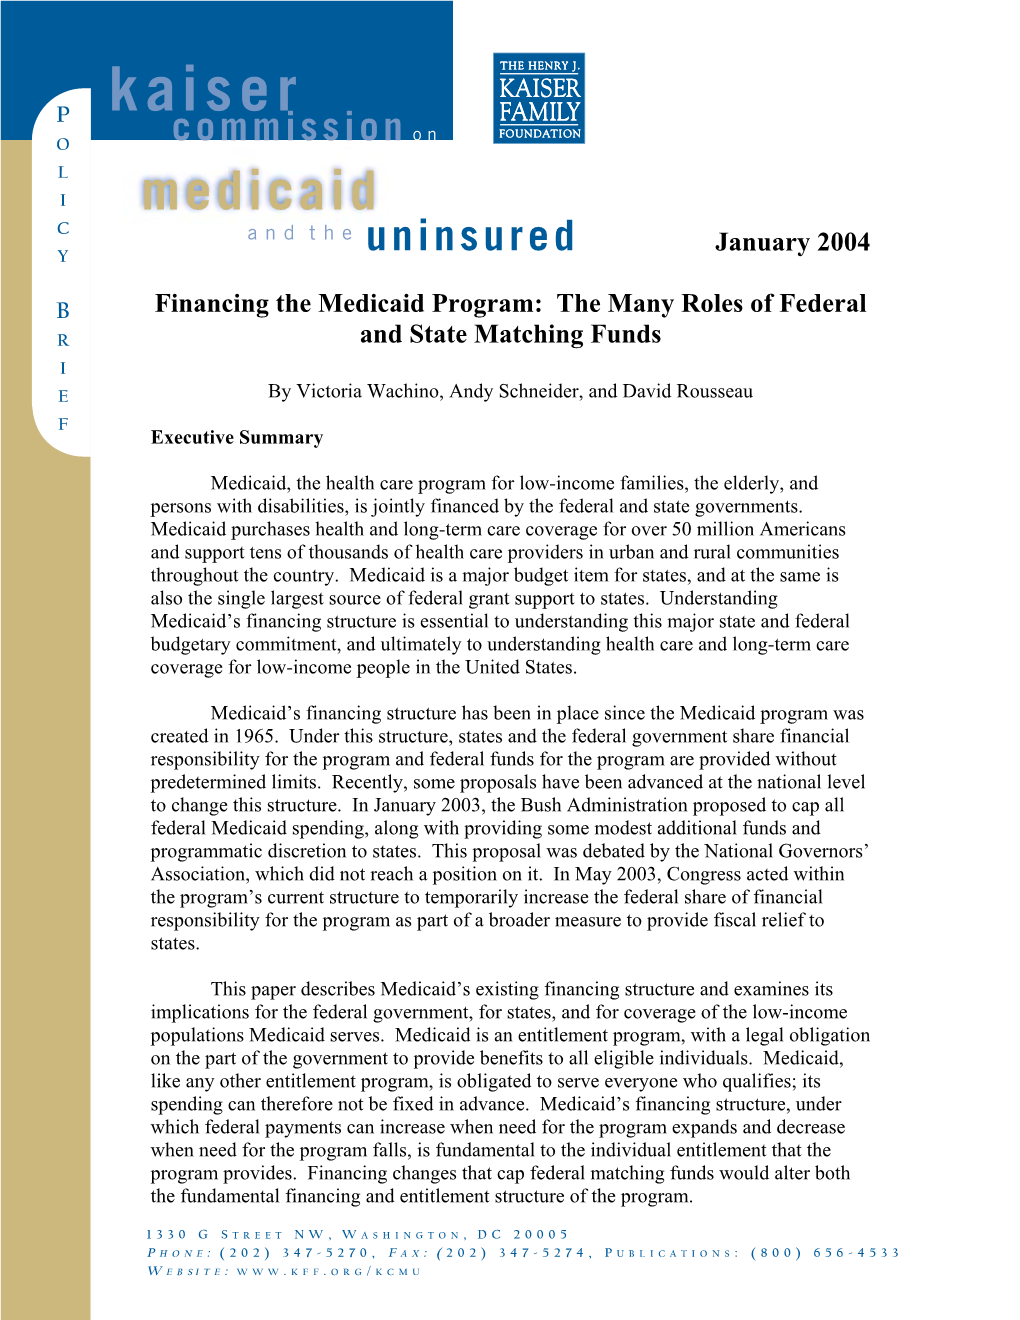 Financing the Medicaid Program: the Many Roles of Federal R and State Matching Funds I E by Victoria Wachino, Andy Schneider, and David Rousseau